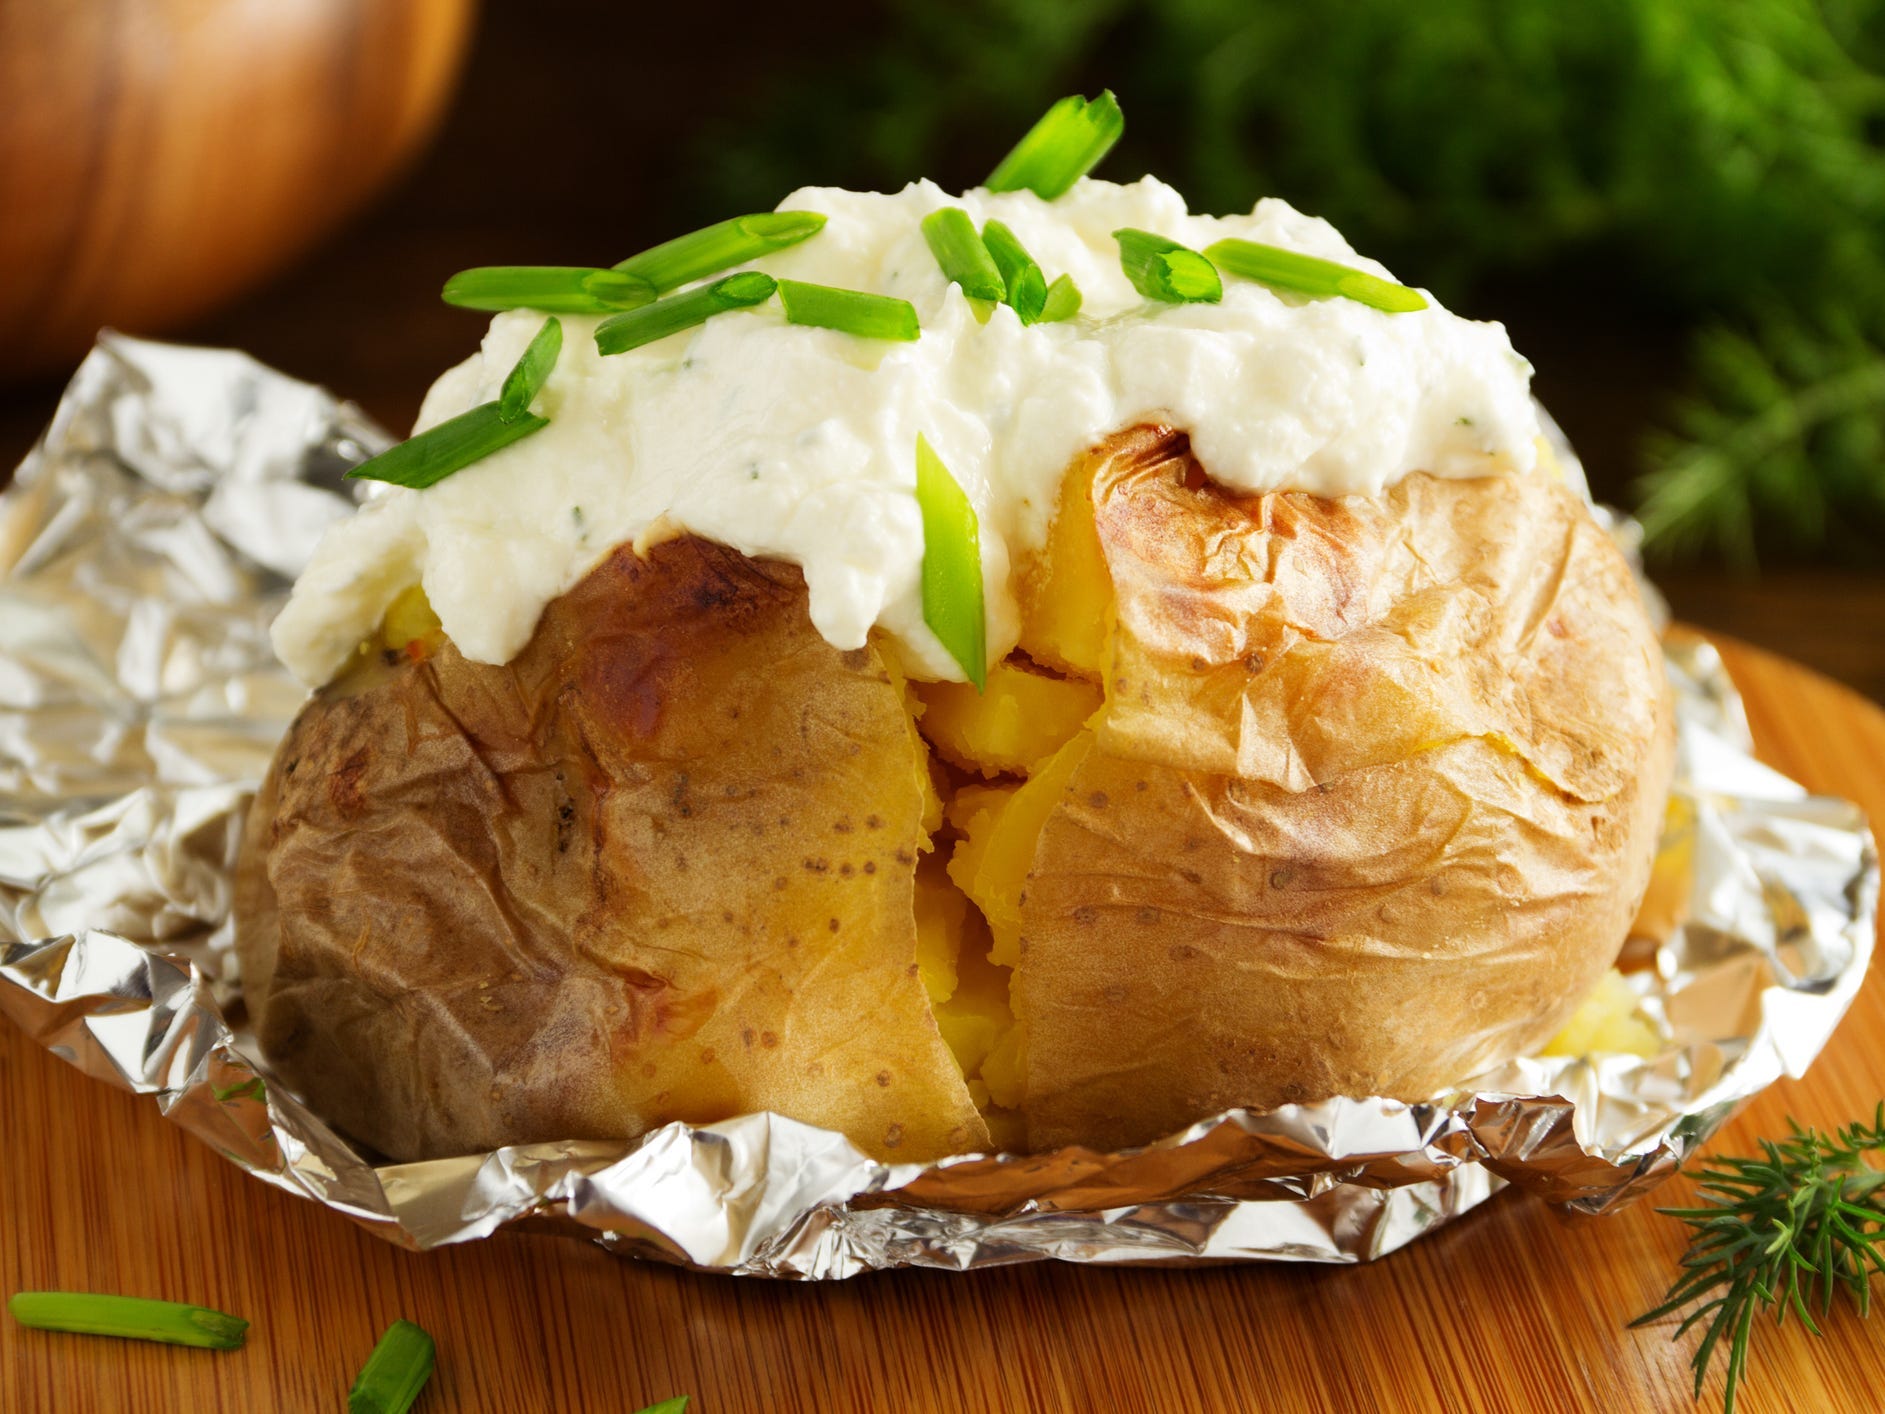 A baked potato sitting in foil topped with sour cream and chives